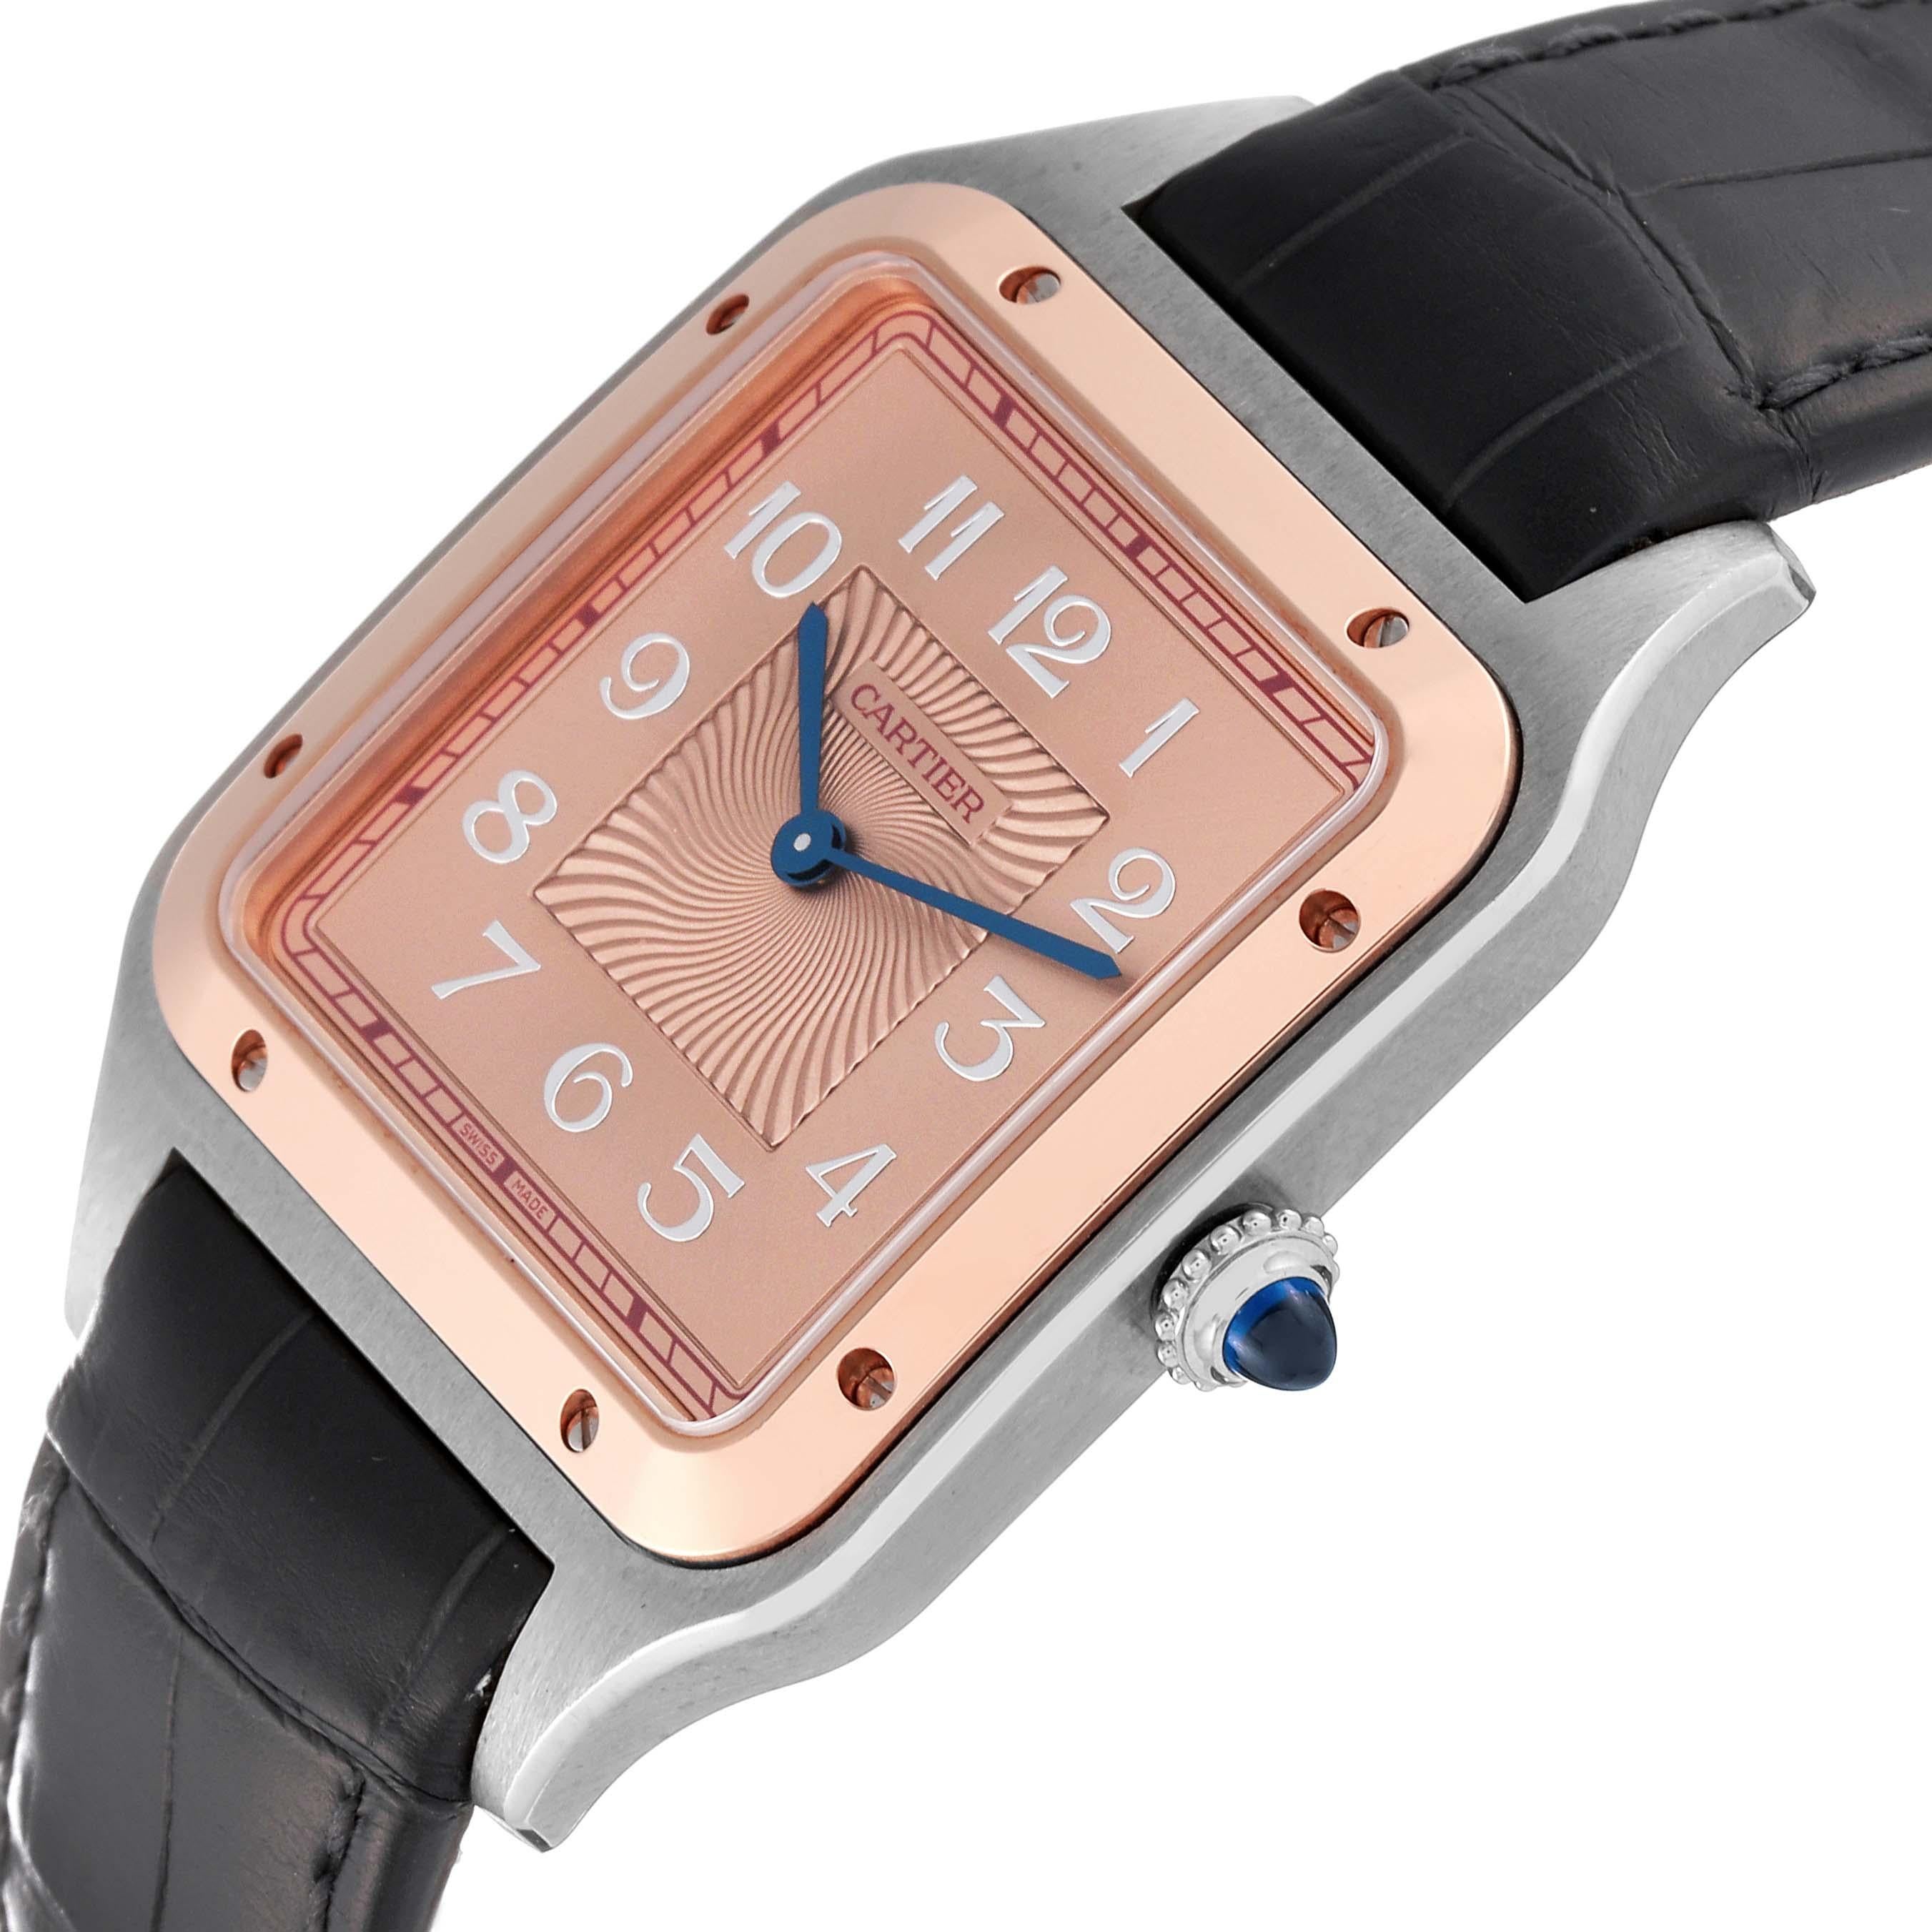 Cartier Santos Dumont XL Steel Rose Gold Limited Edition Mens Watch W2SA0025  3